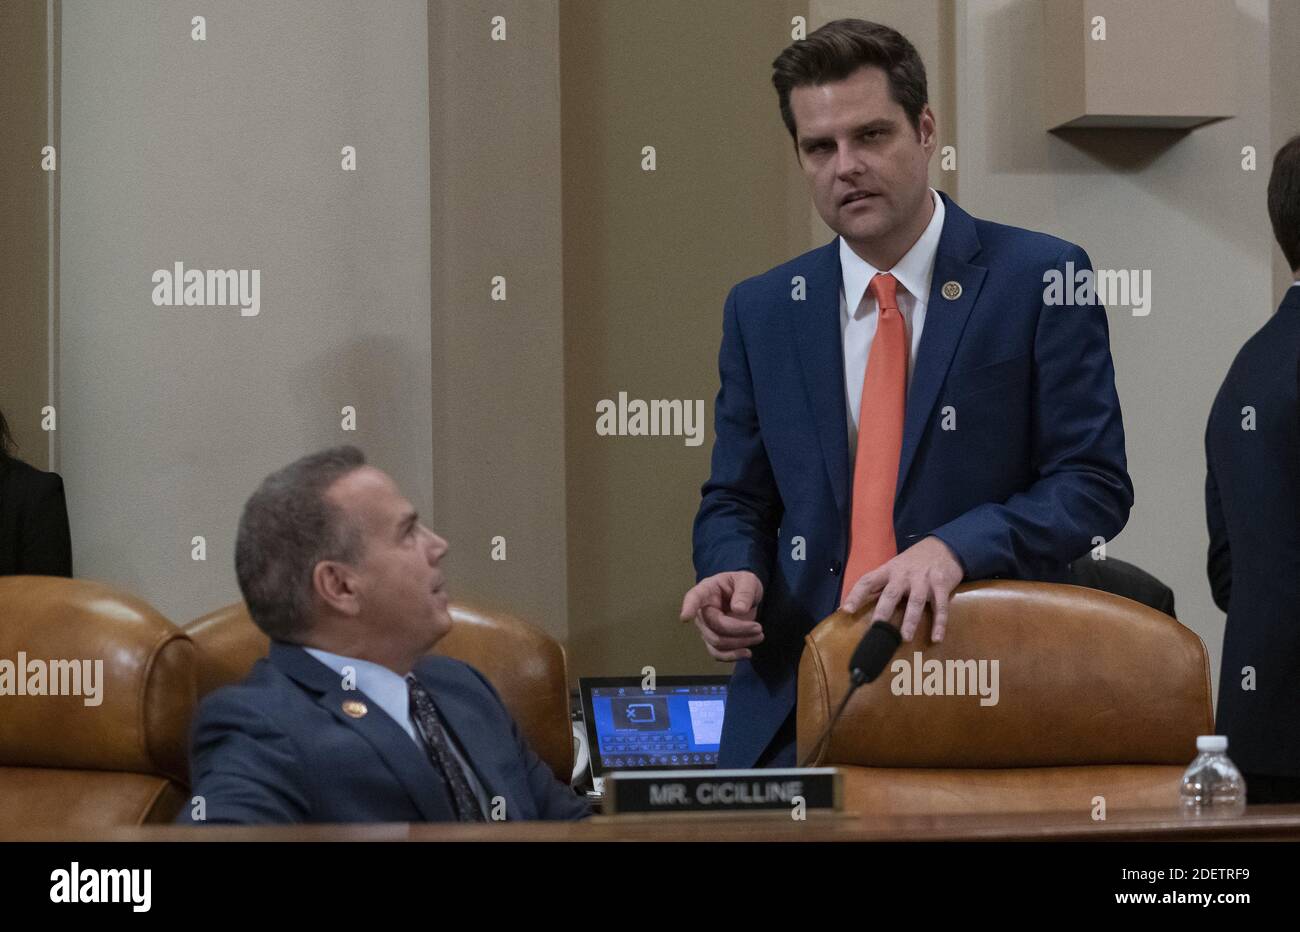 United States Representative David Cicilline (Democrat of Rhode Island), left, and US Representative Matt Gaetz (Republican of Florida), right, confer prior to hearing opening statements as the US House Committee on the Judiciary begins its markup of House Resolution 755, Articles of Impeachment Against President Donald J. Trump, in the Longworth House Office Building in Washington, DC, USA on Wednesday, December 11, 2019. Photo by Ron Sachs/CNP/ABACAPRESS.COM Stock Photo